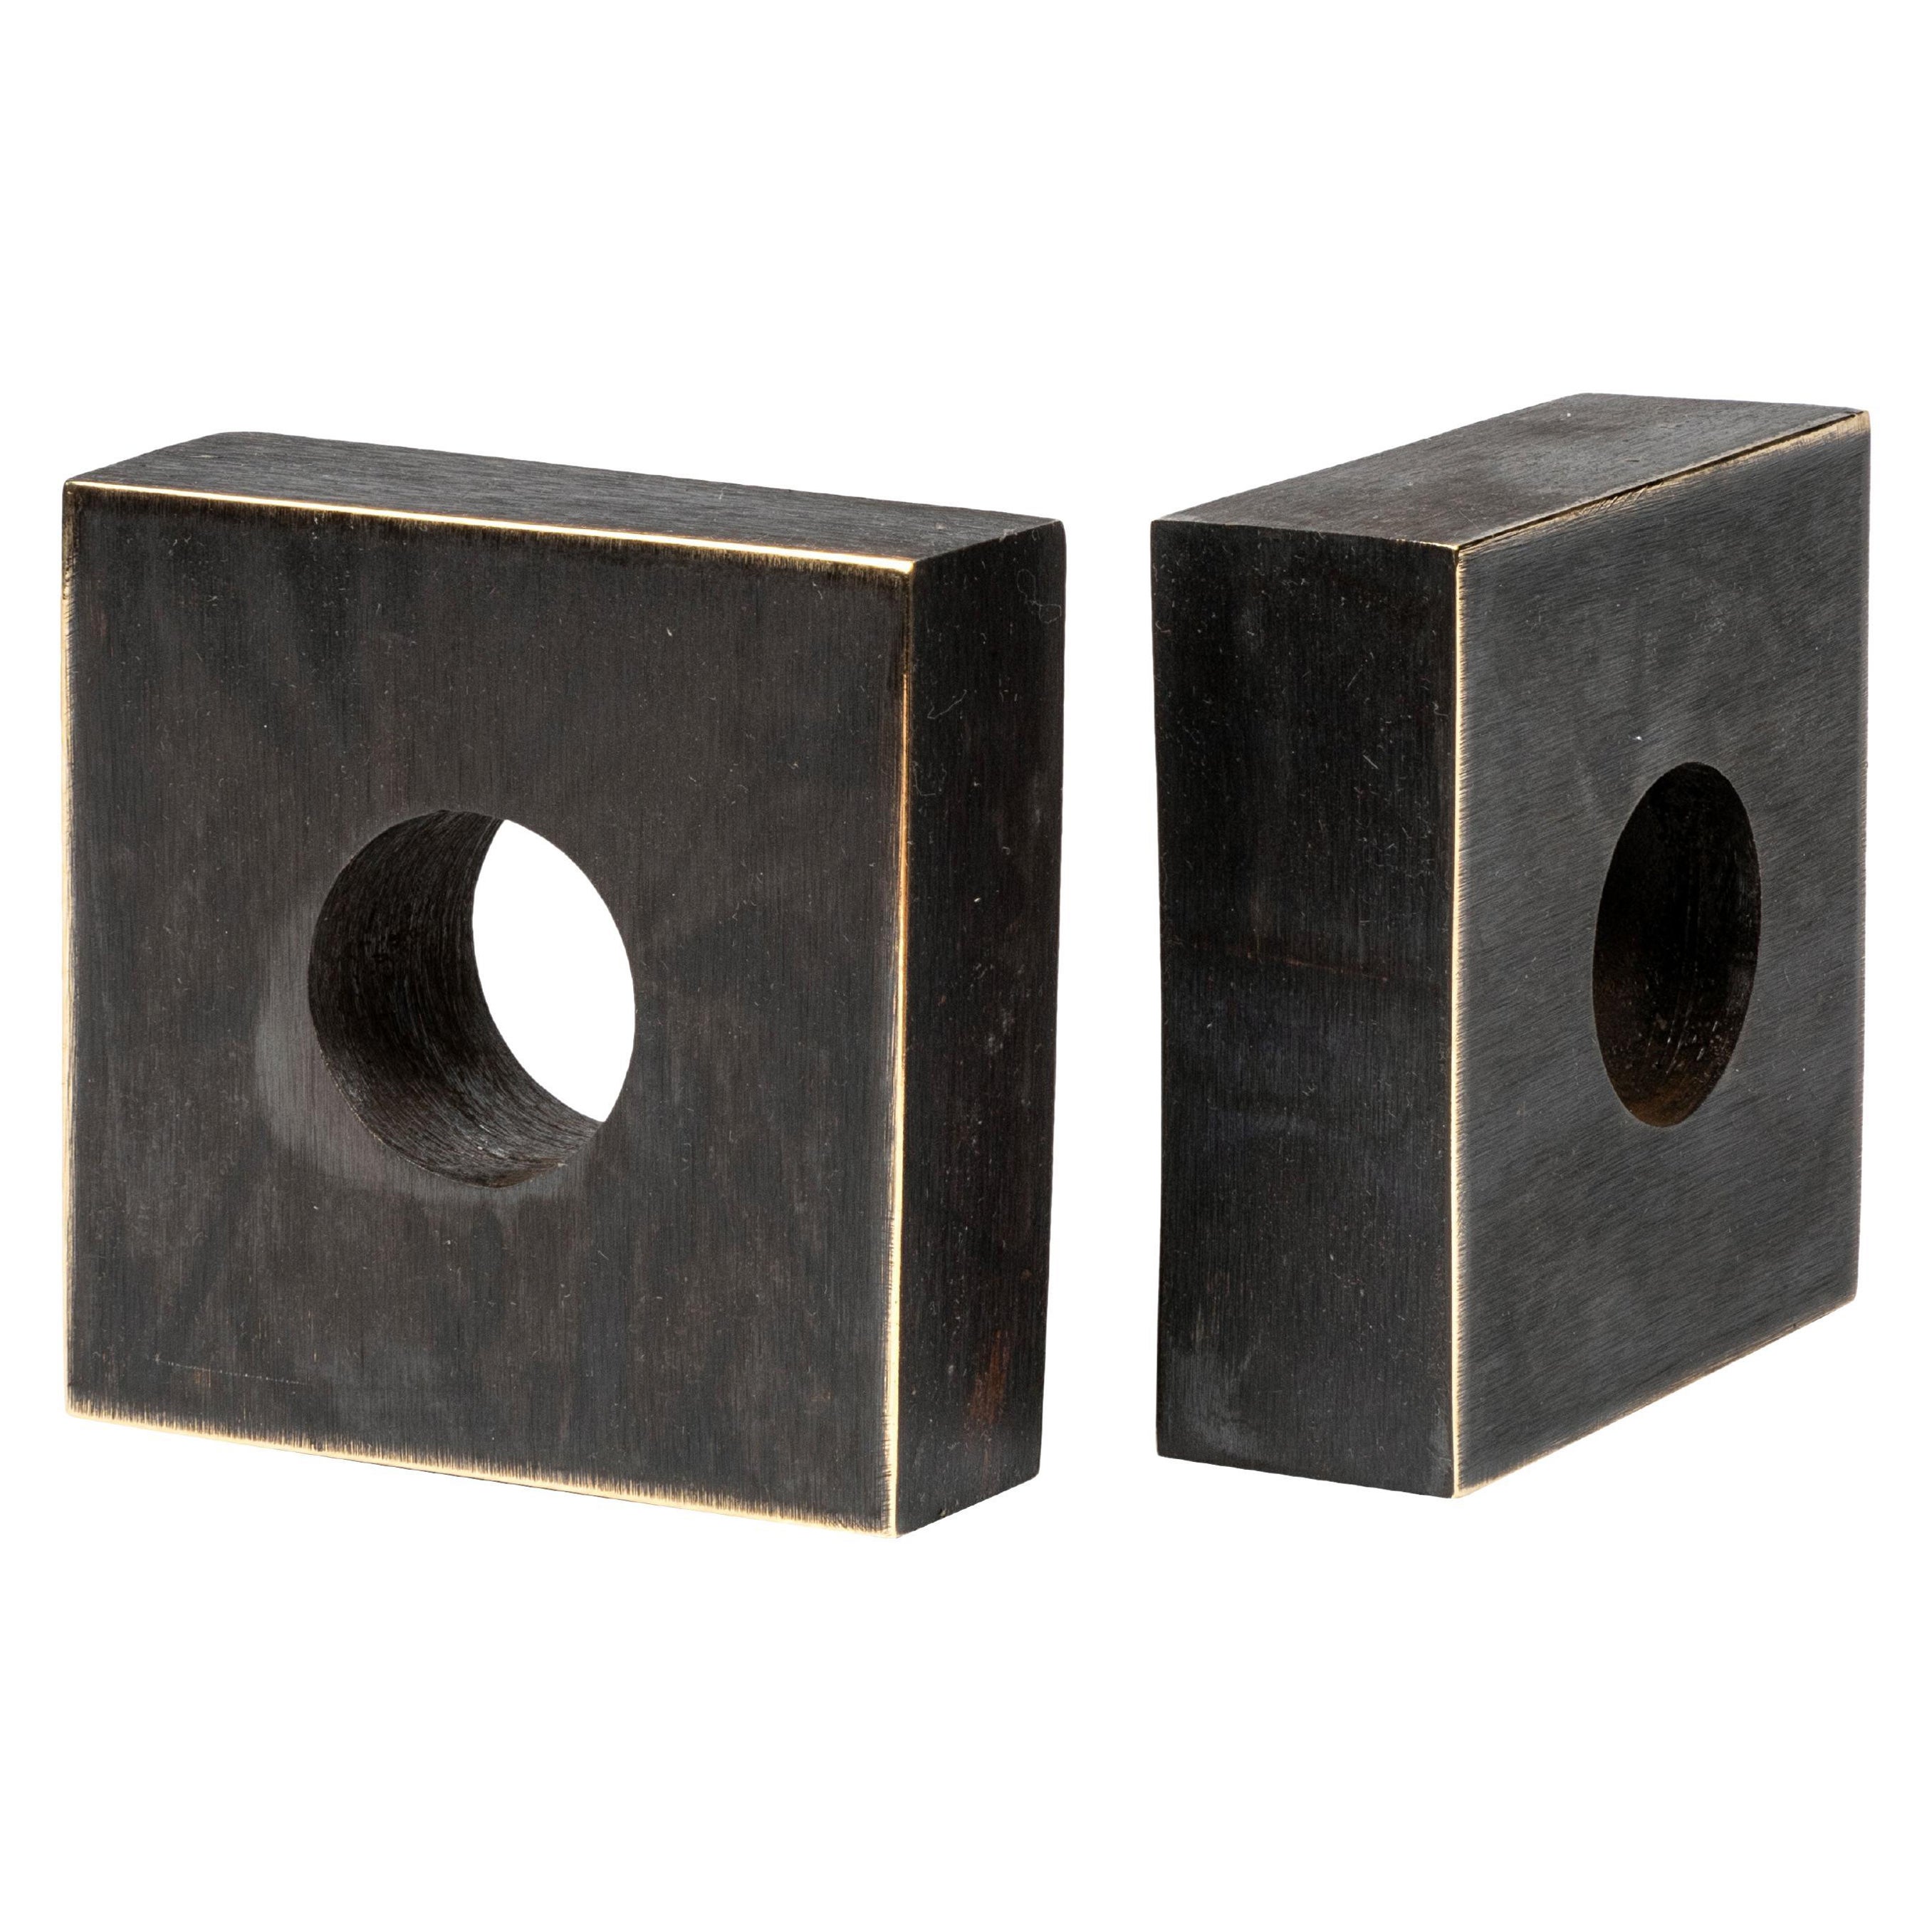 Pair of Carl Auböck Model #4575 Patinated Brass Bookends